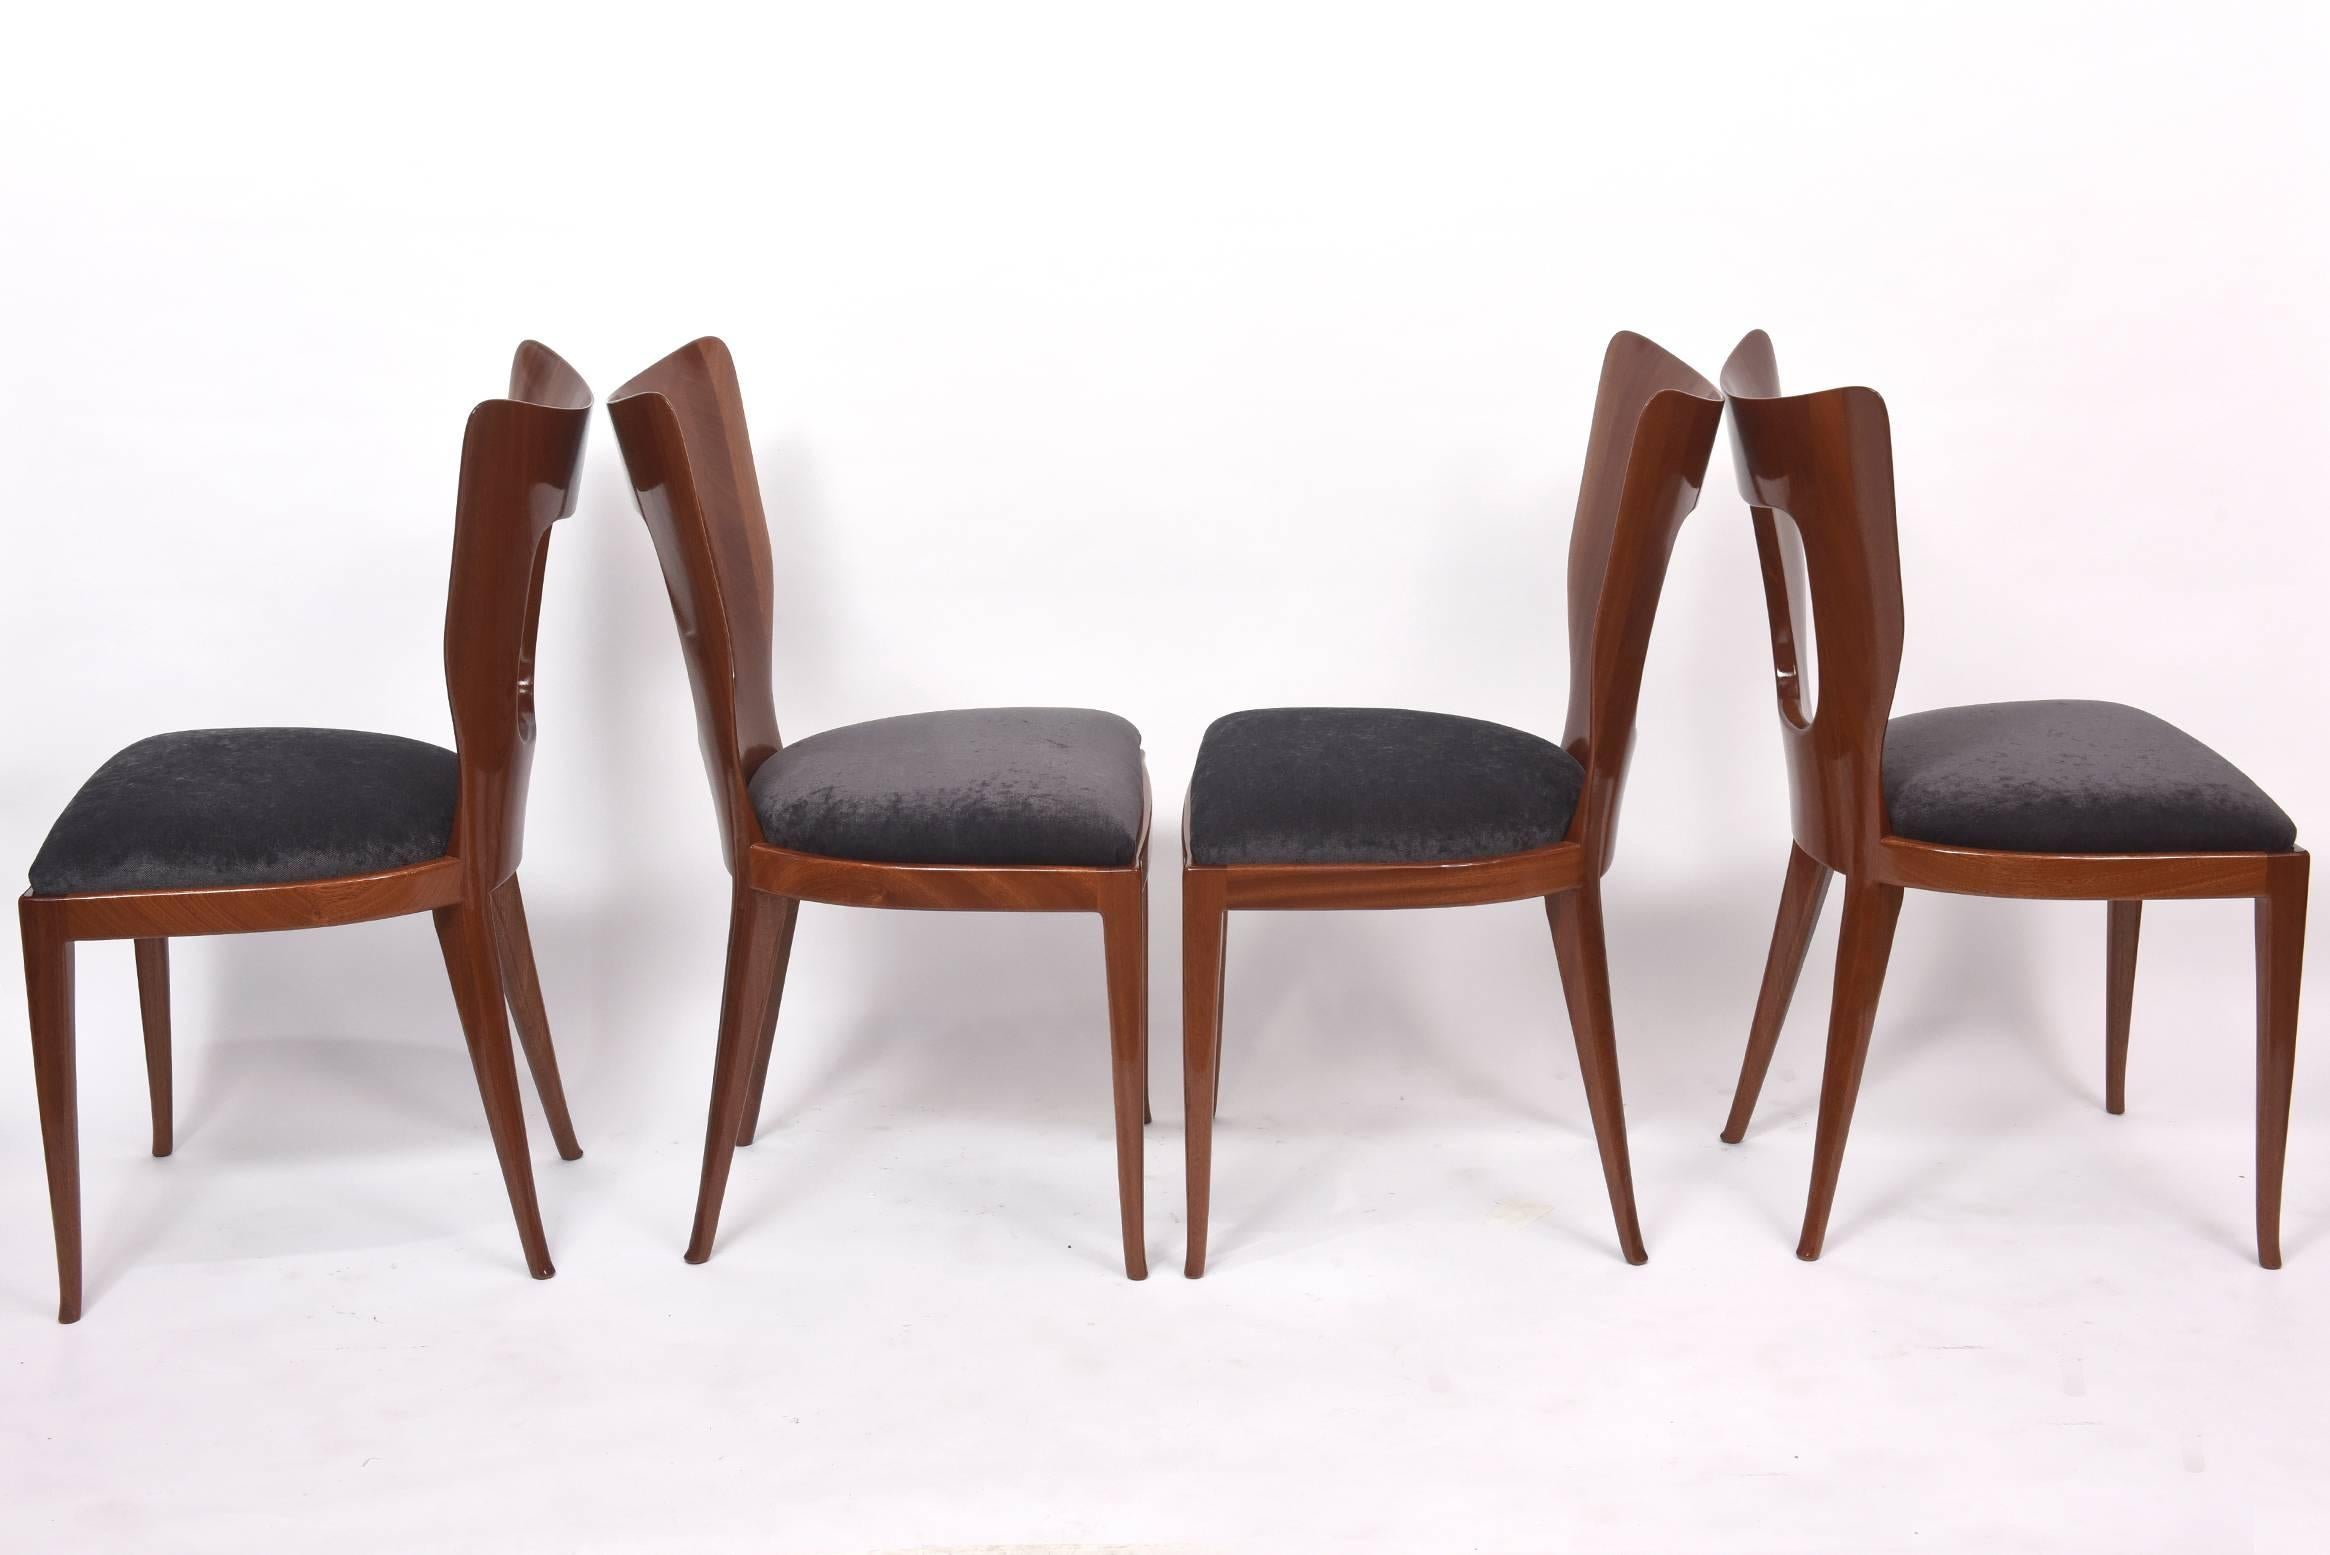 The curved back with geometric cut-out, on round tapering splayed legs, each with metal label, atelier borsani.